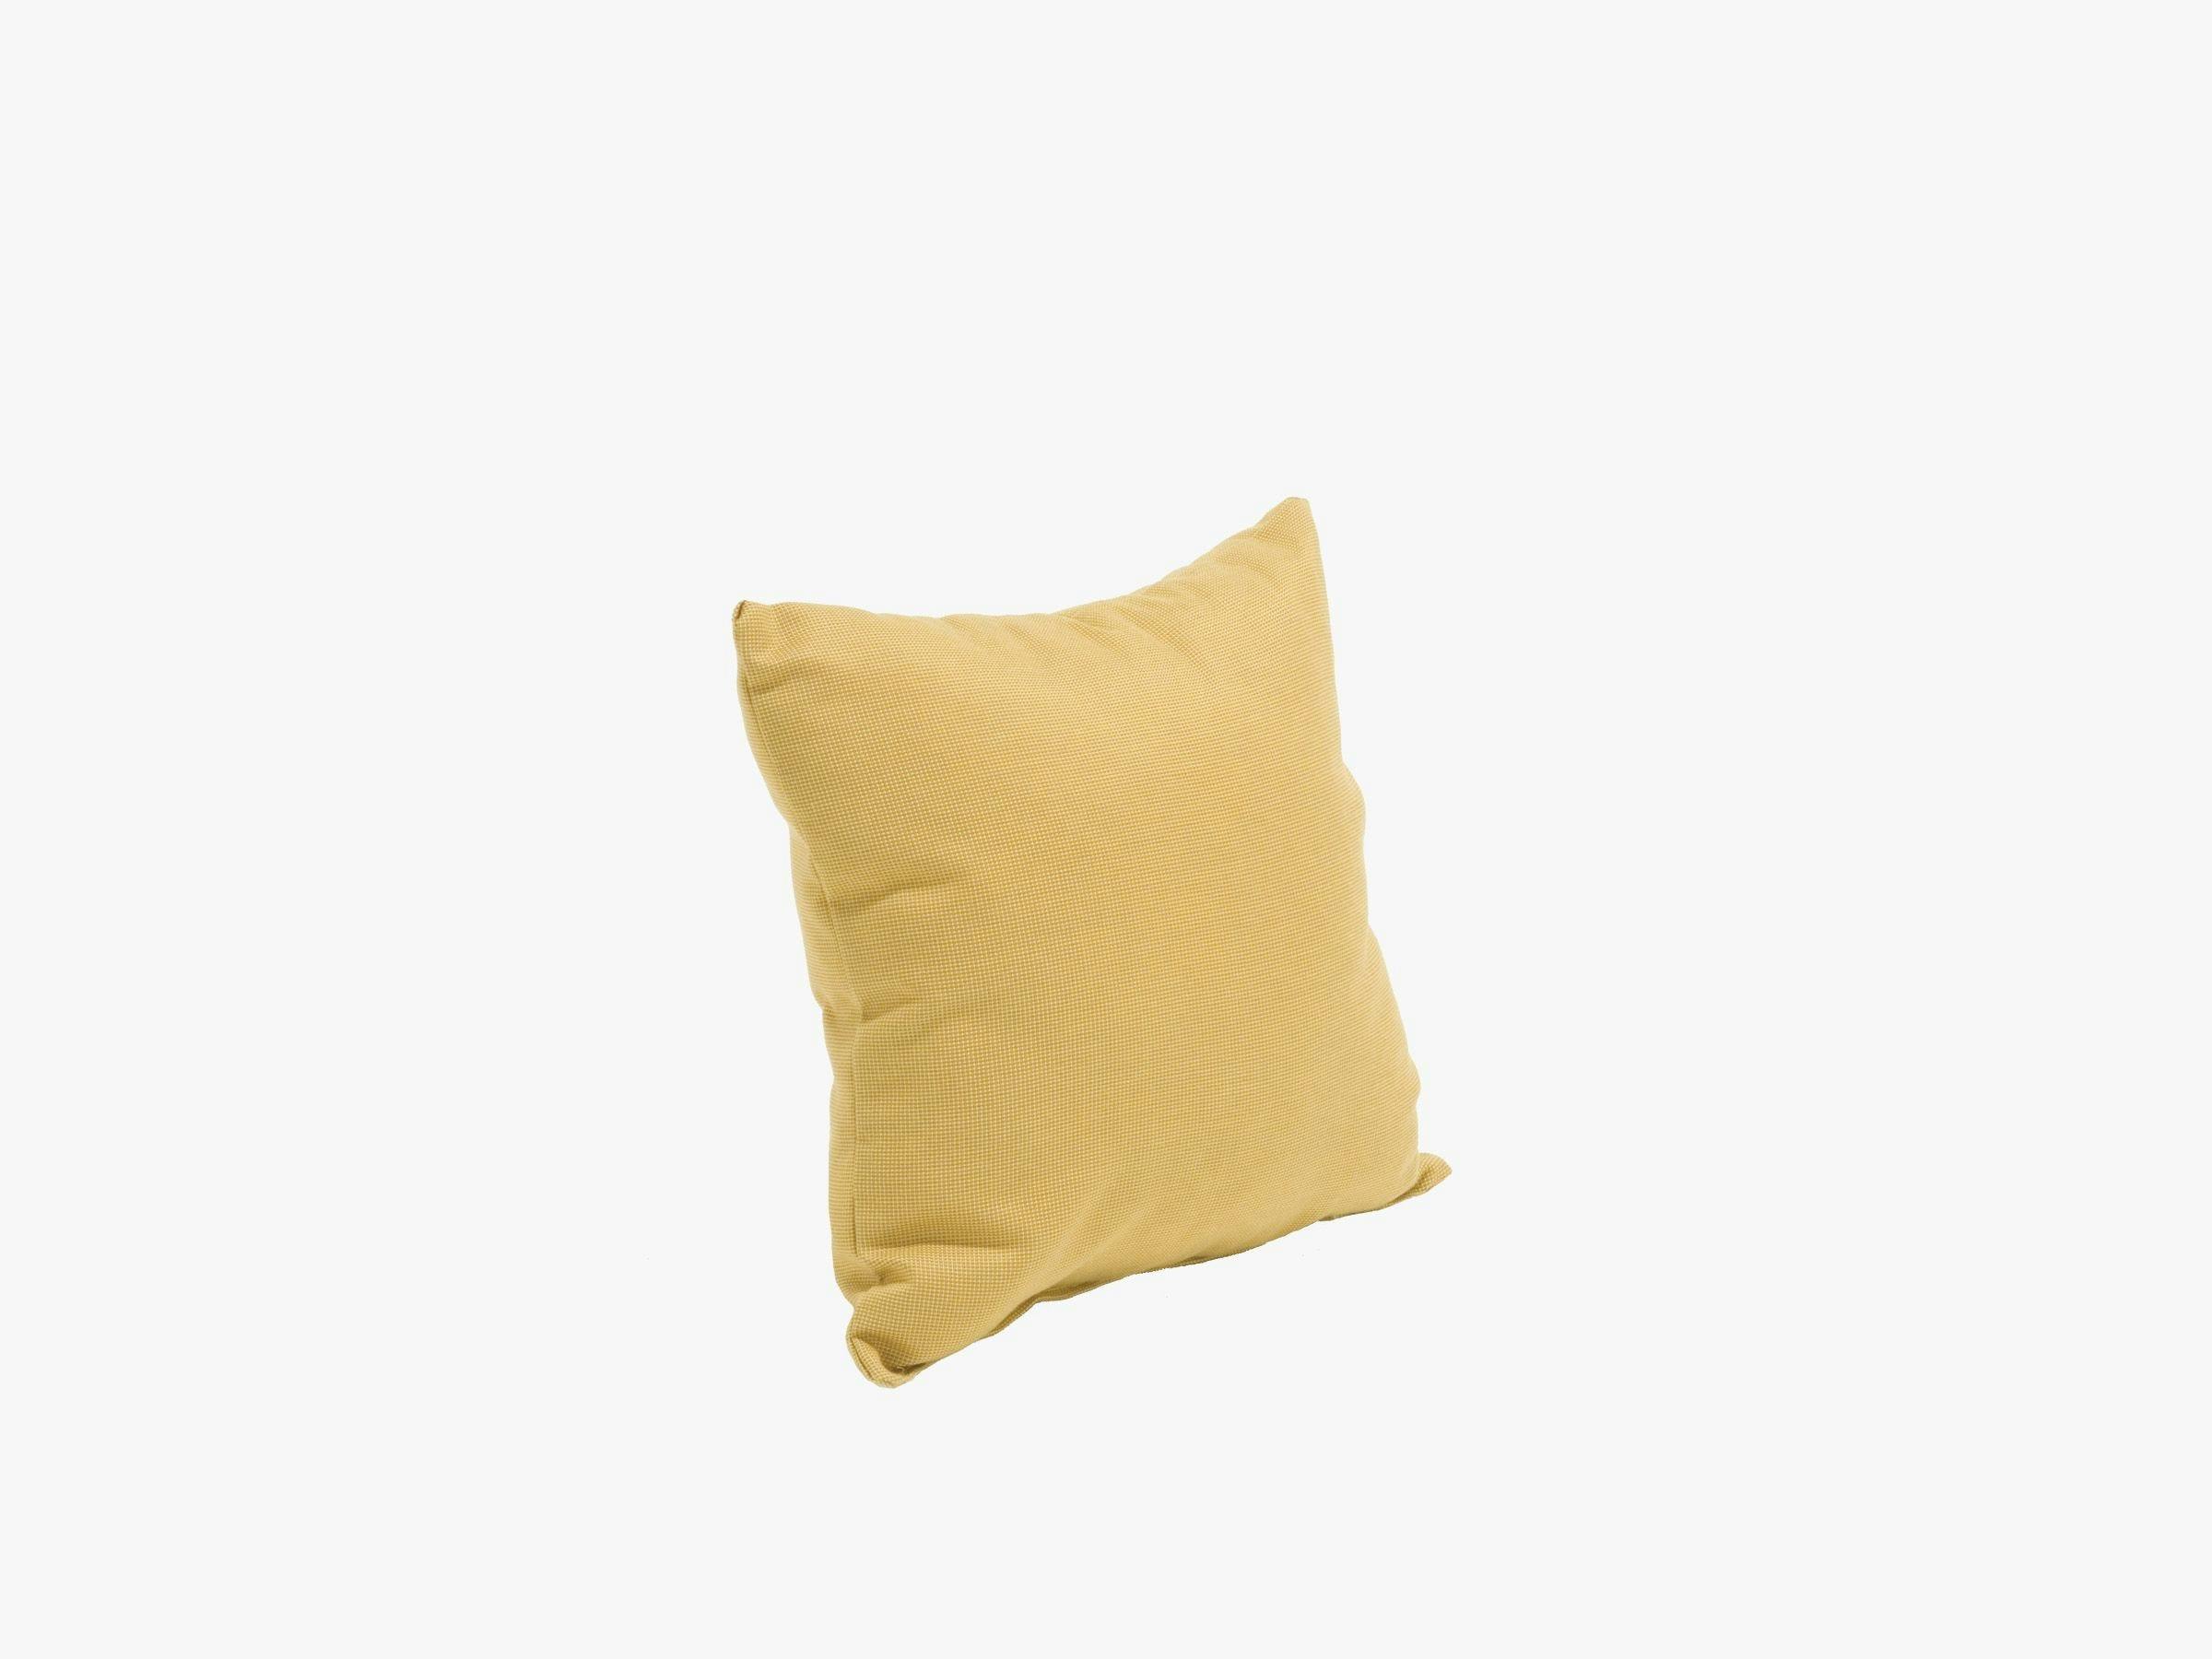 18" Square Throw Pillow without Welt